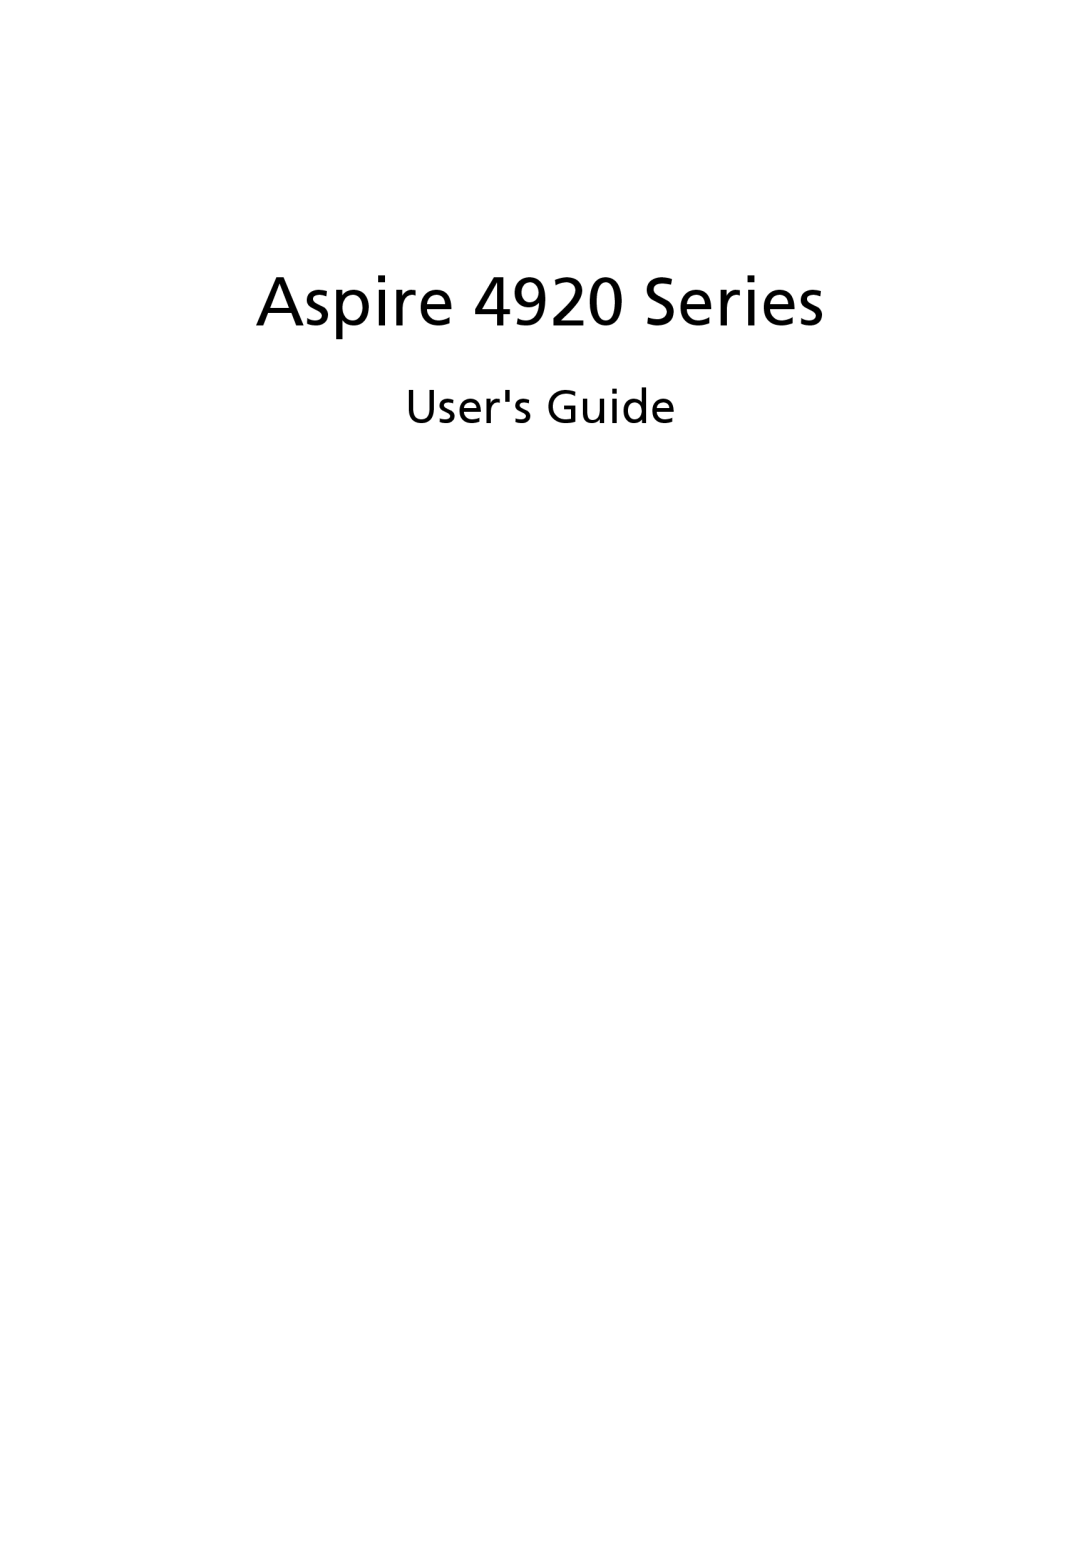 Acer MS2219 manual Users Guide, Aspire 4920 Series 